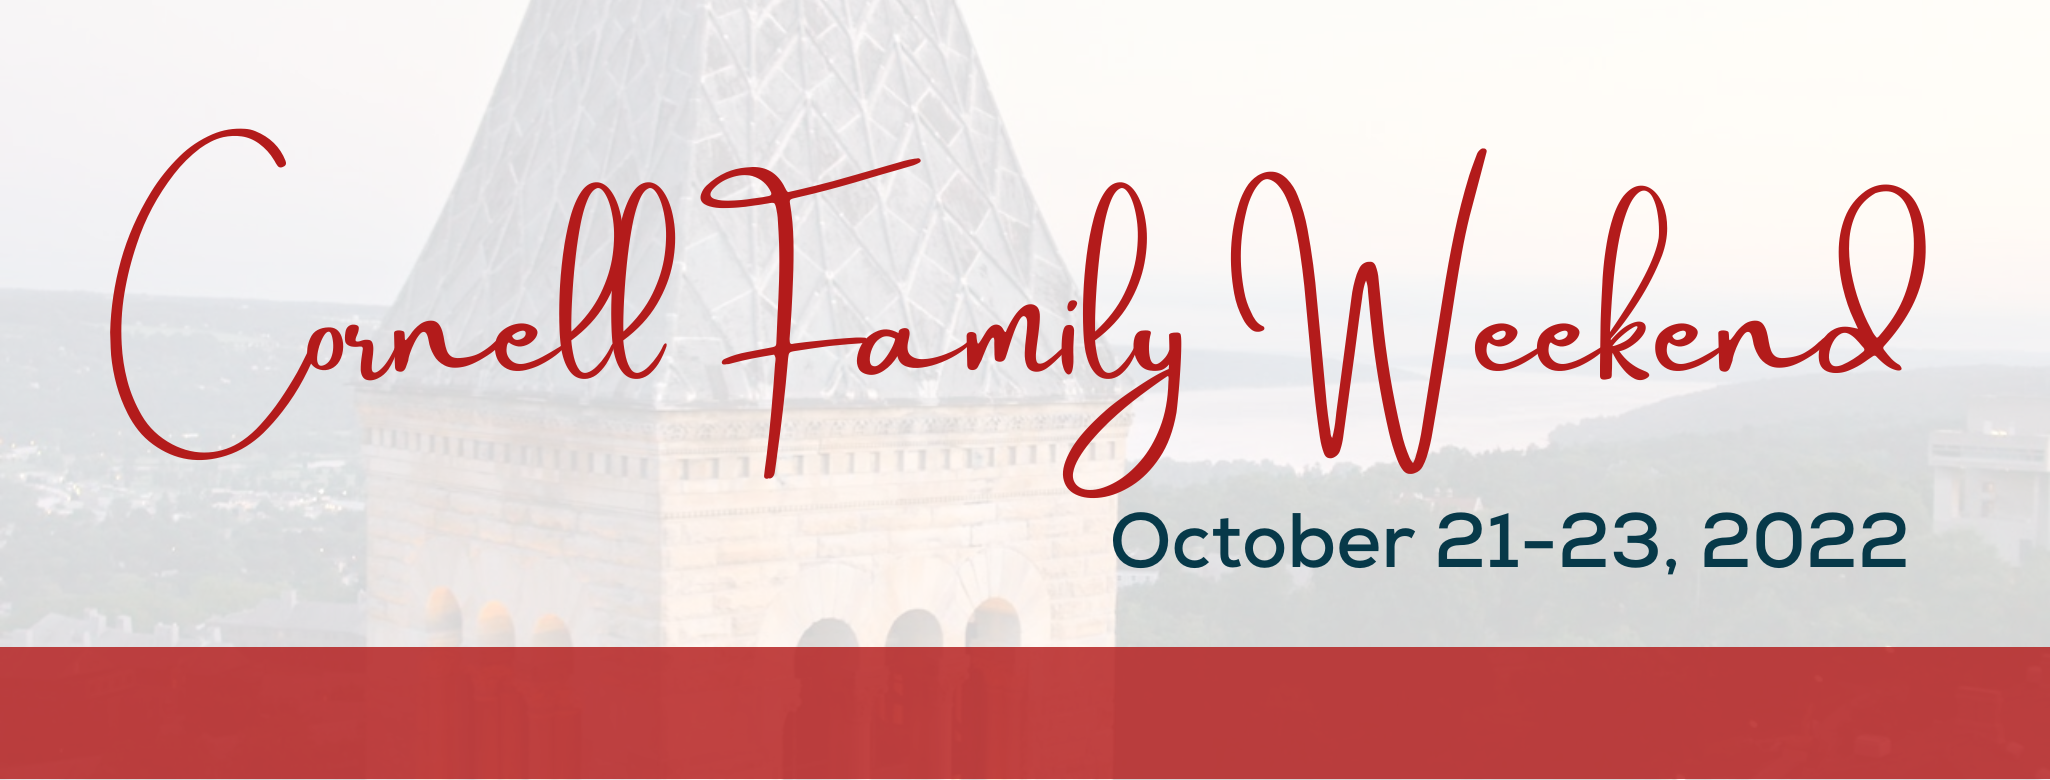 Cornell Family Weekend, October 21-23, 2022